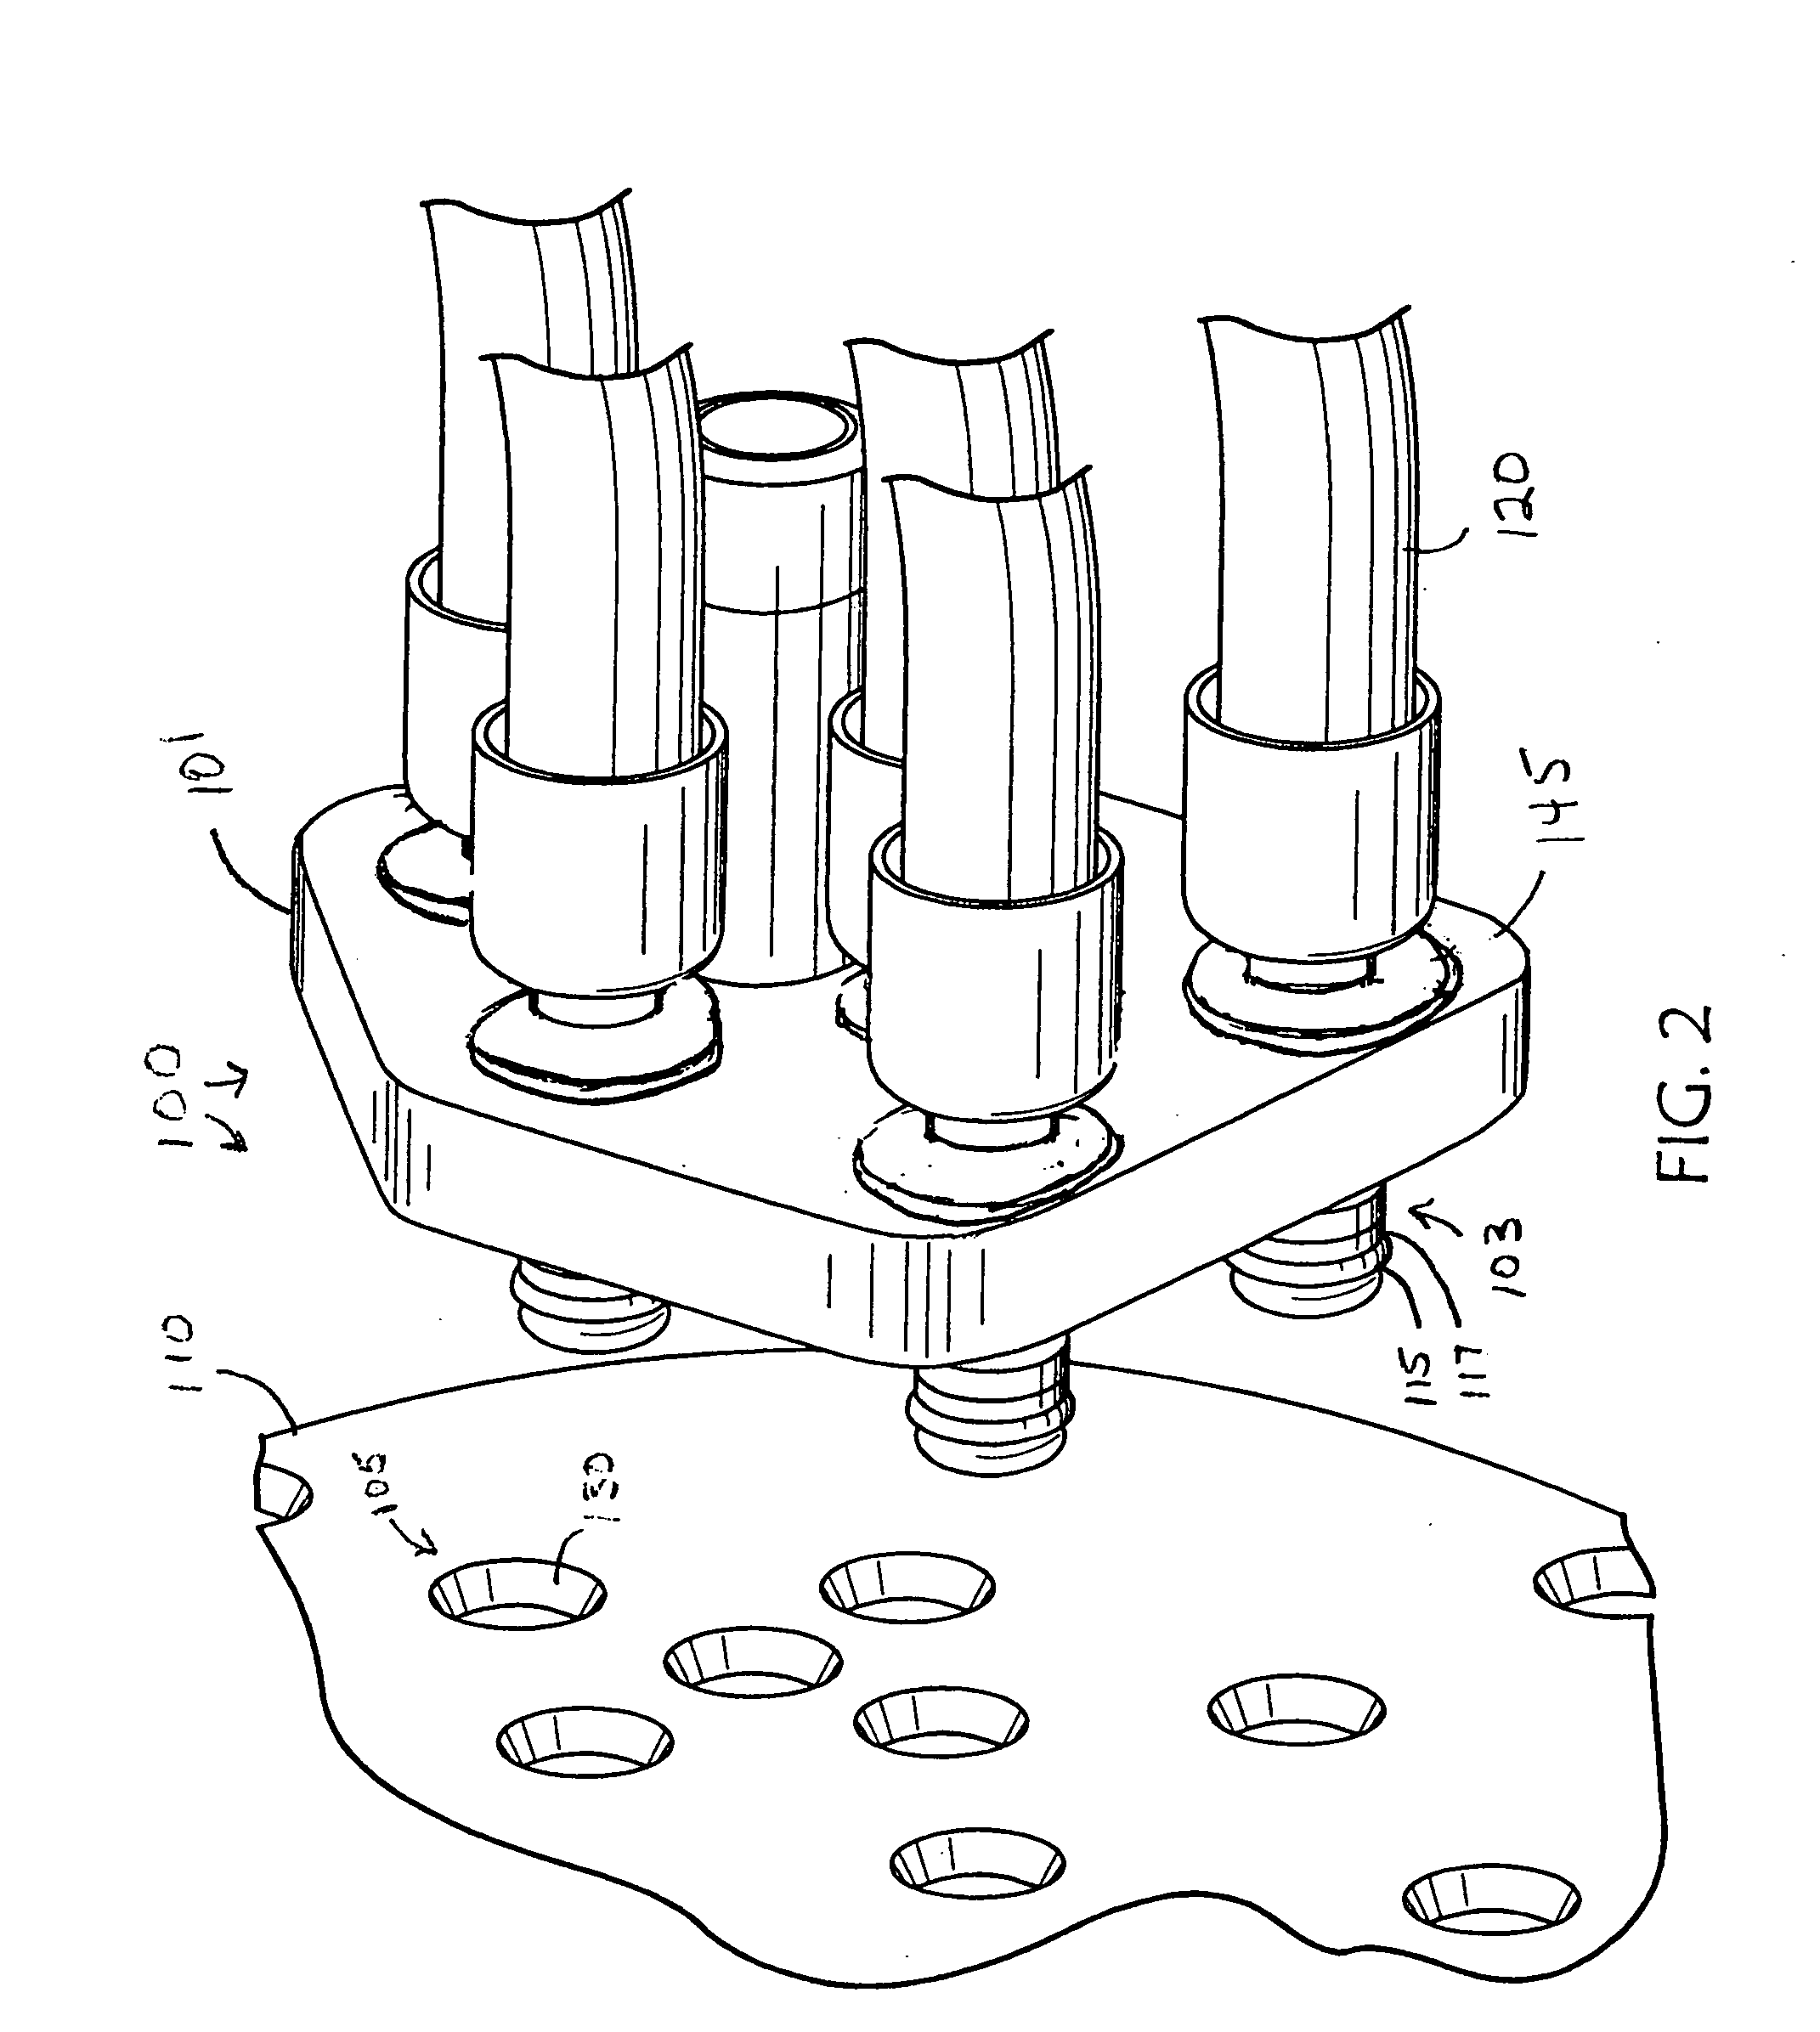 Multi-port fluid connectors, systems and methods